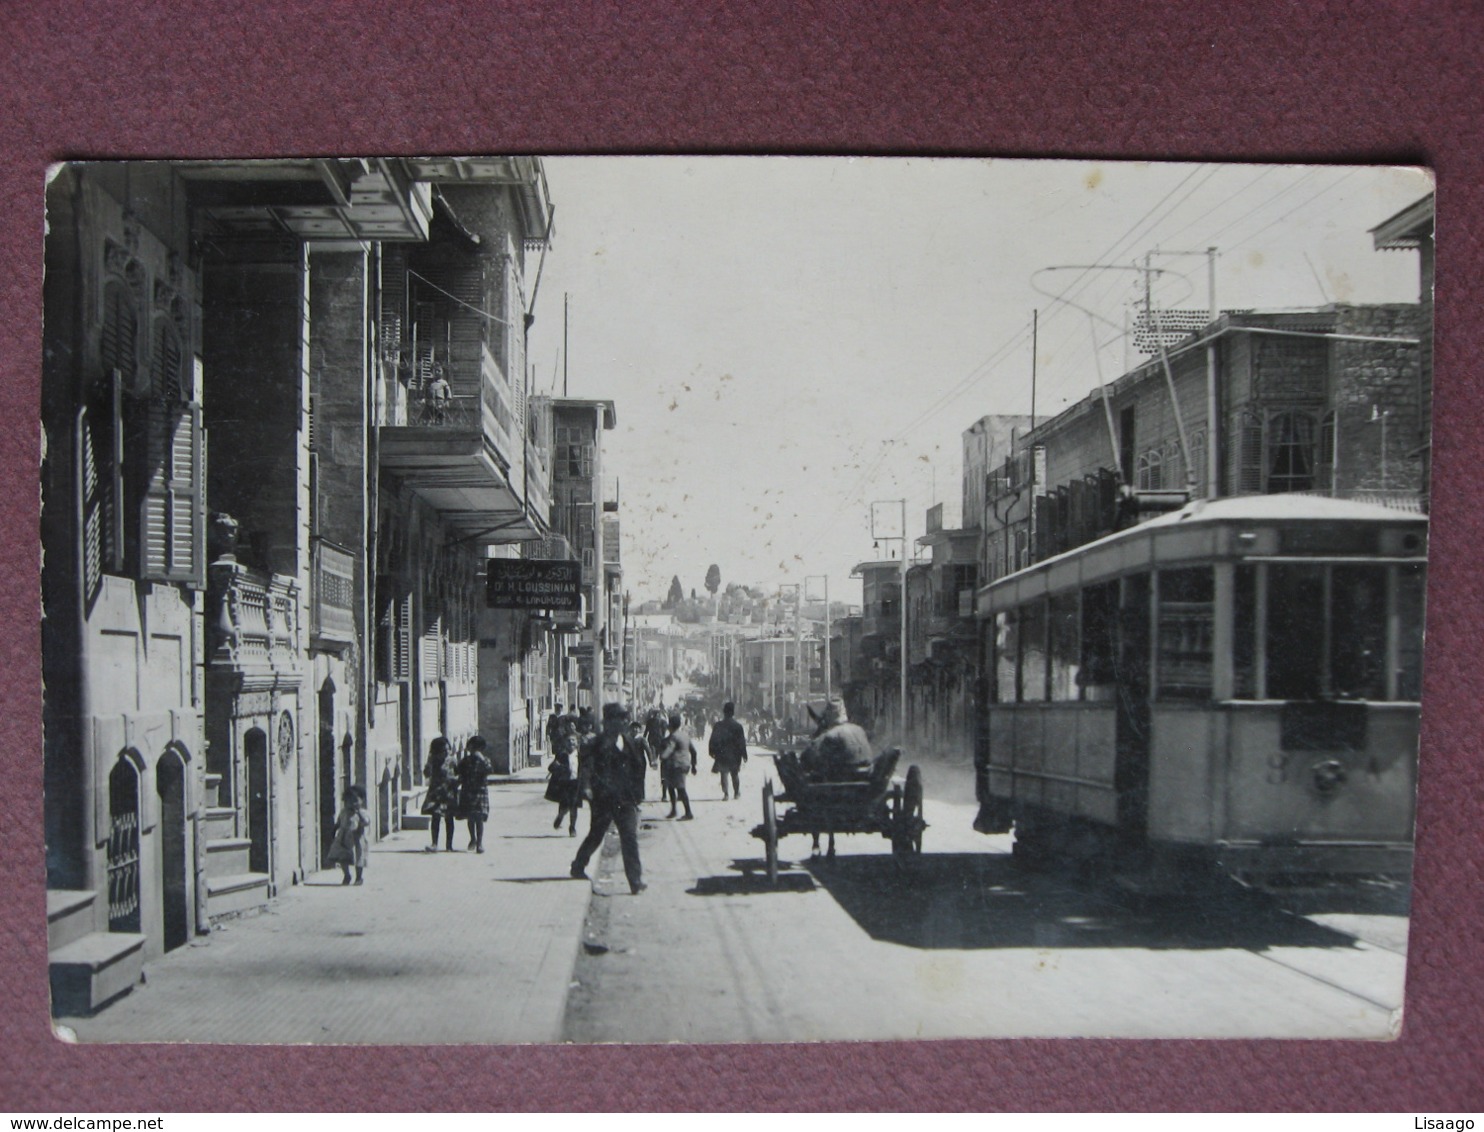 CPA PHOTO SYRIE ALEP Une Rue TRES ANIMEE TRAMWAY ATTELAGE Enseigne Lisible : Docteur H. LOUSSINIAN 1933 RARE ! - Syria